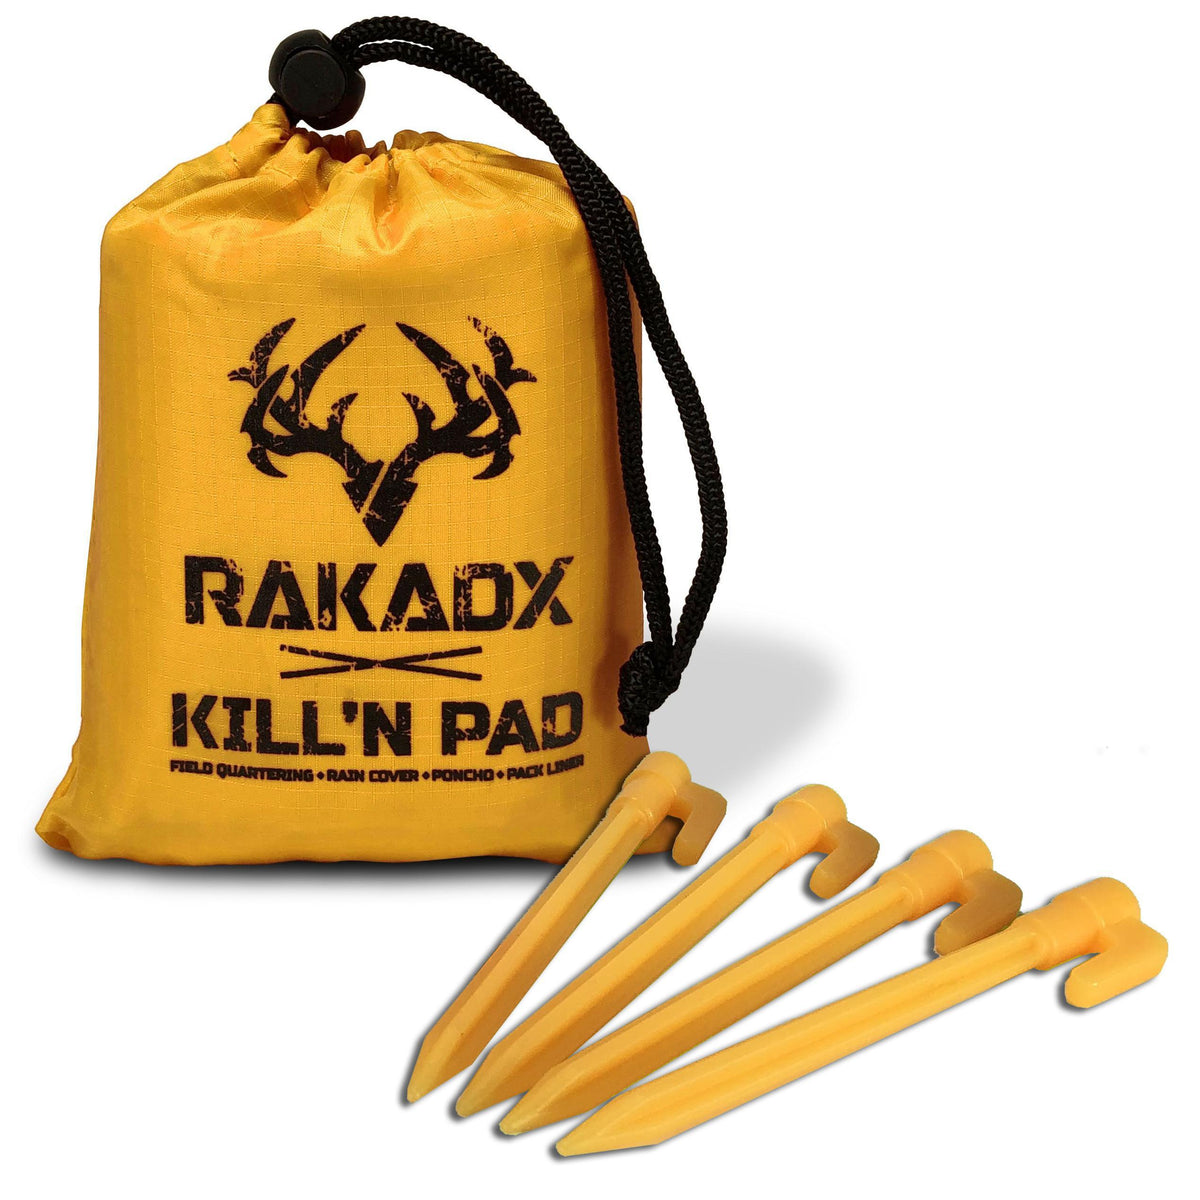 Kill &#39;N Pad - Field Quartering Ground Cover w/Stakes